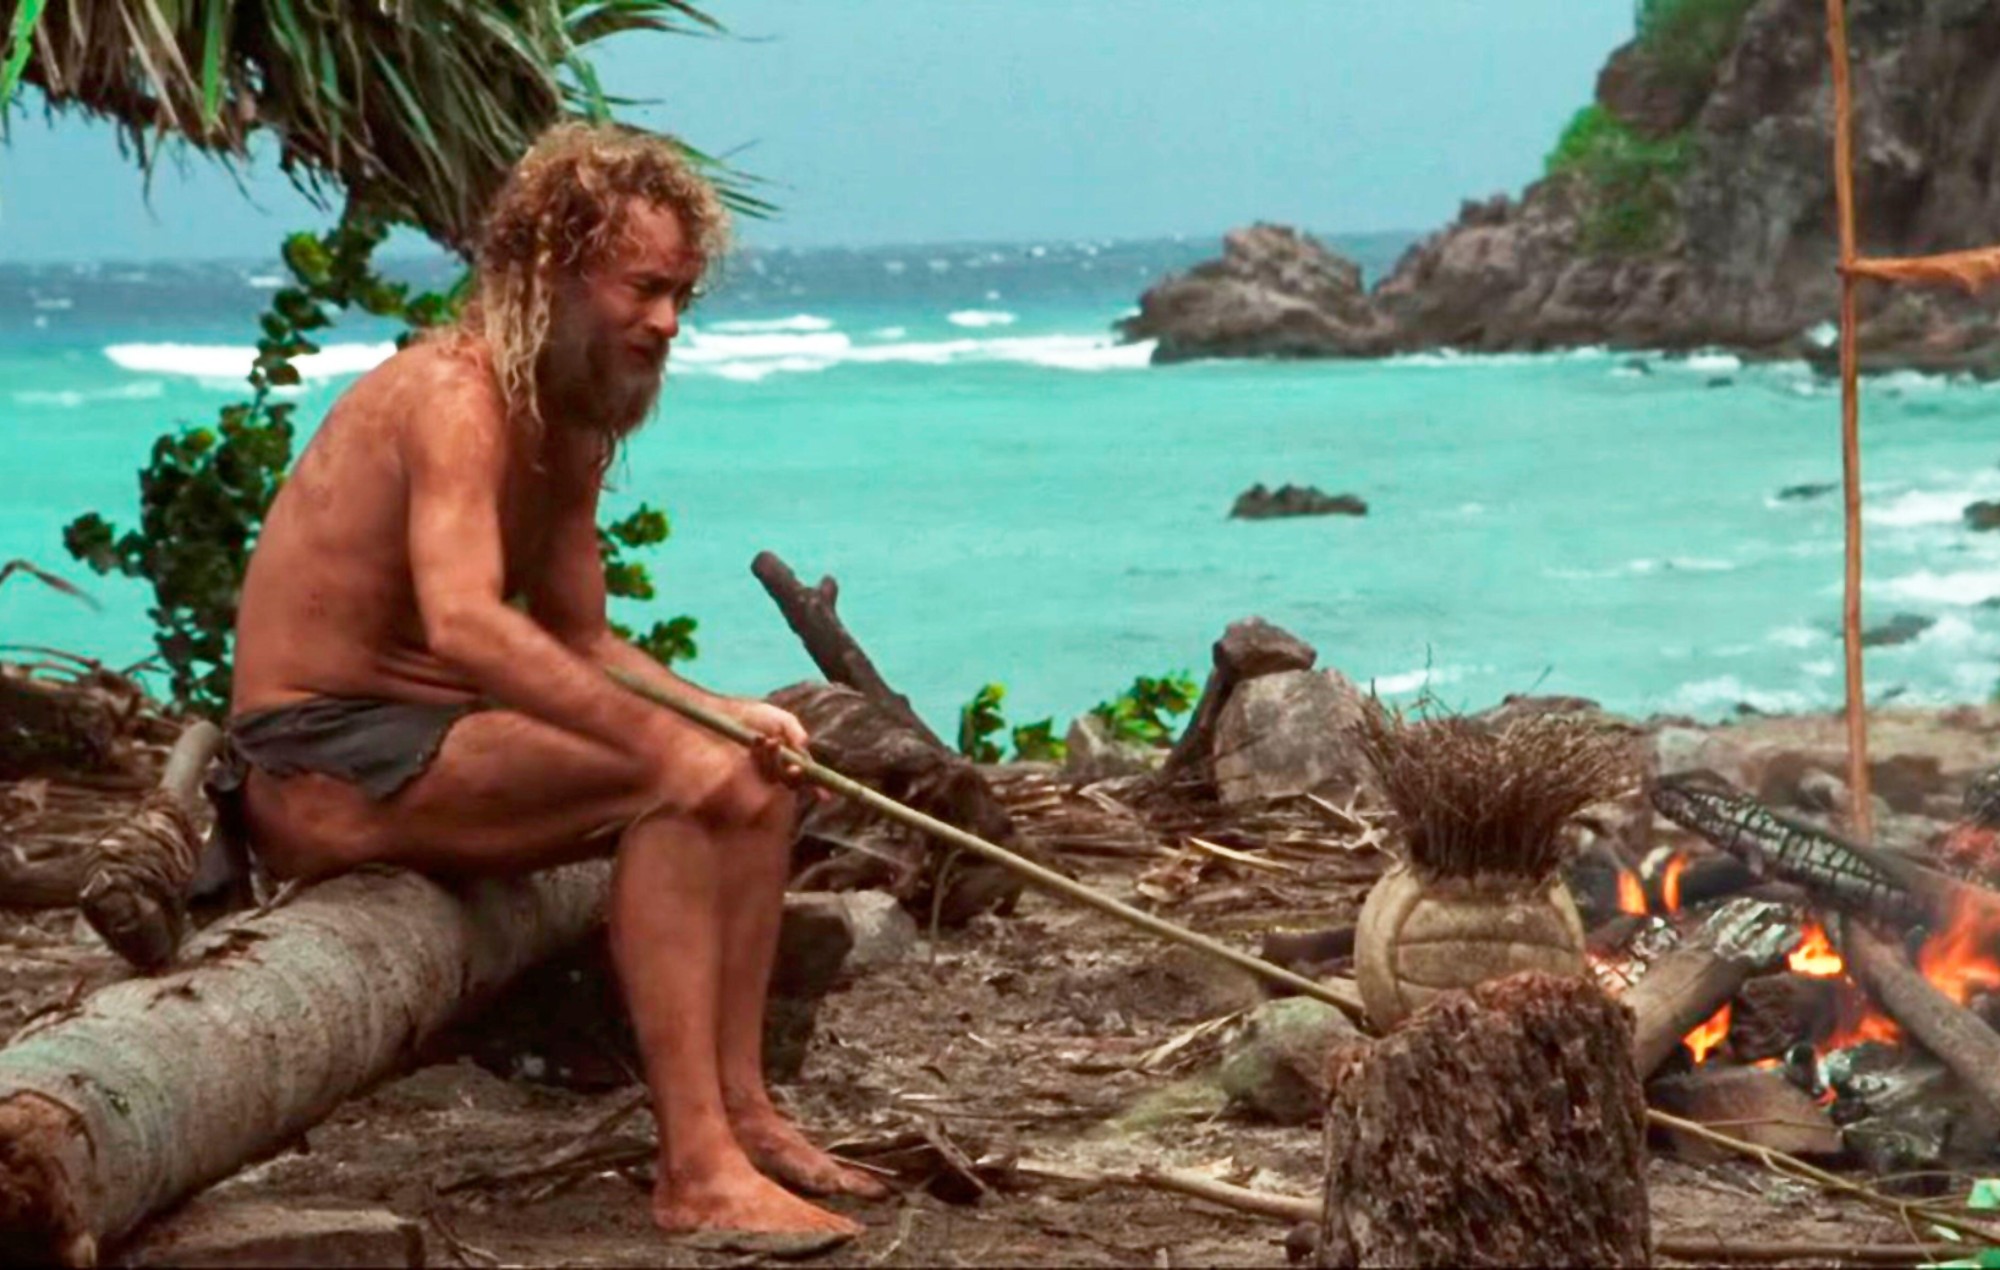 In Cast Away (2000), Tom Hanks is stuck on an island and